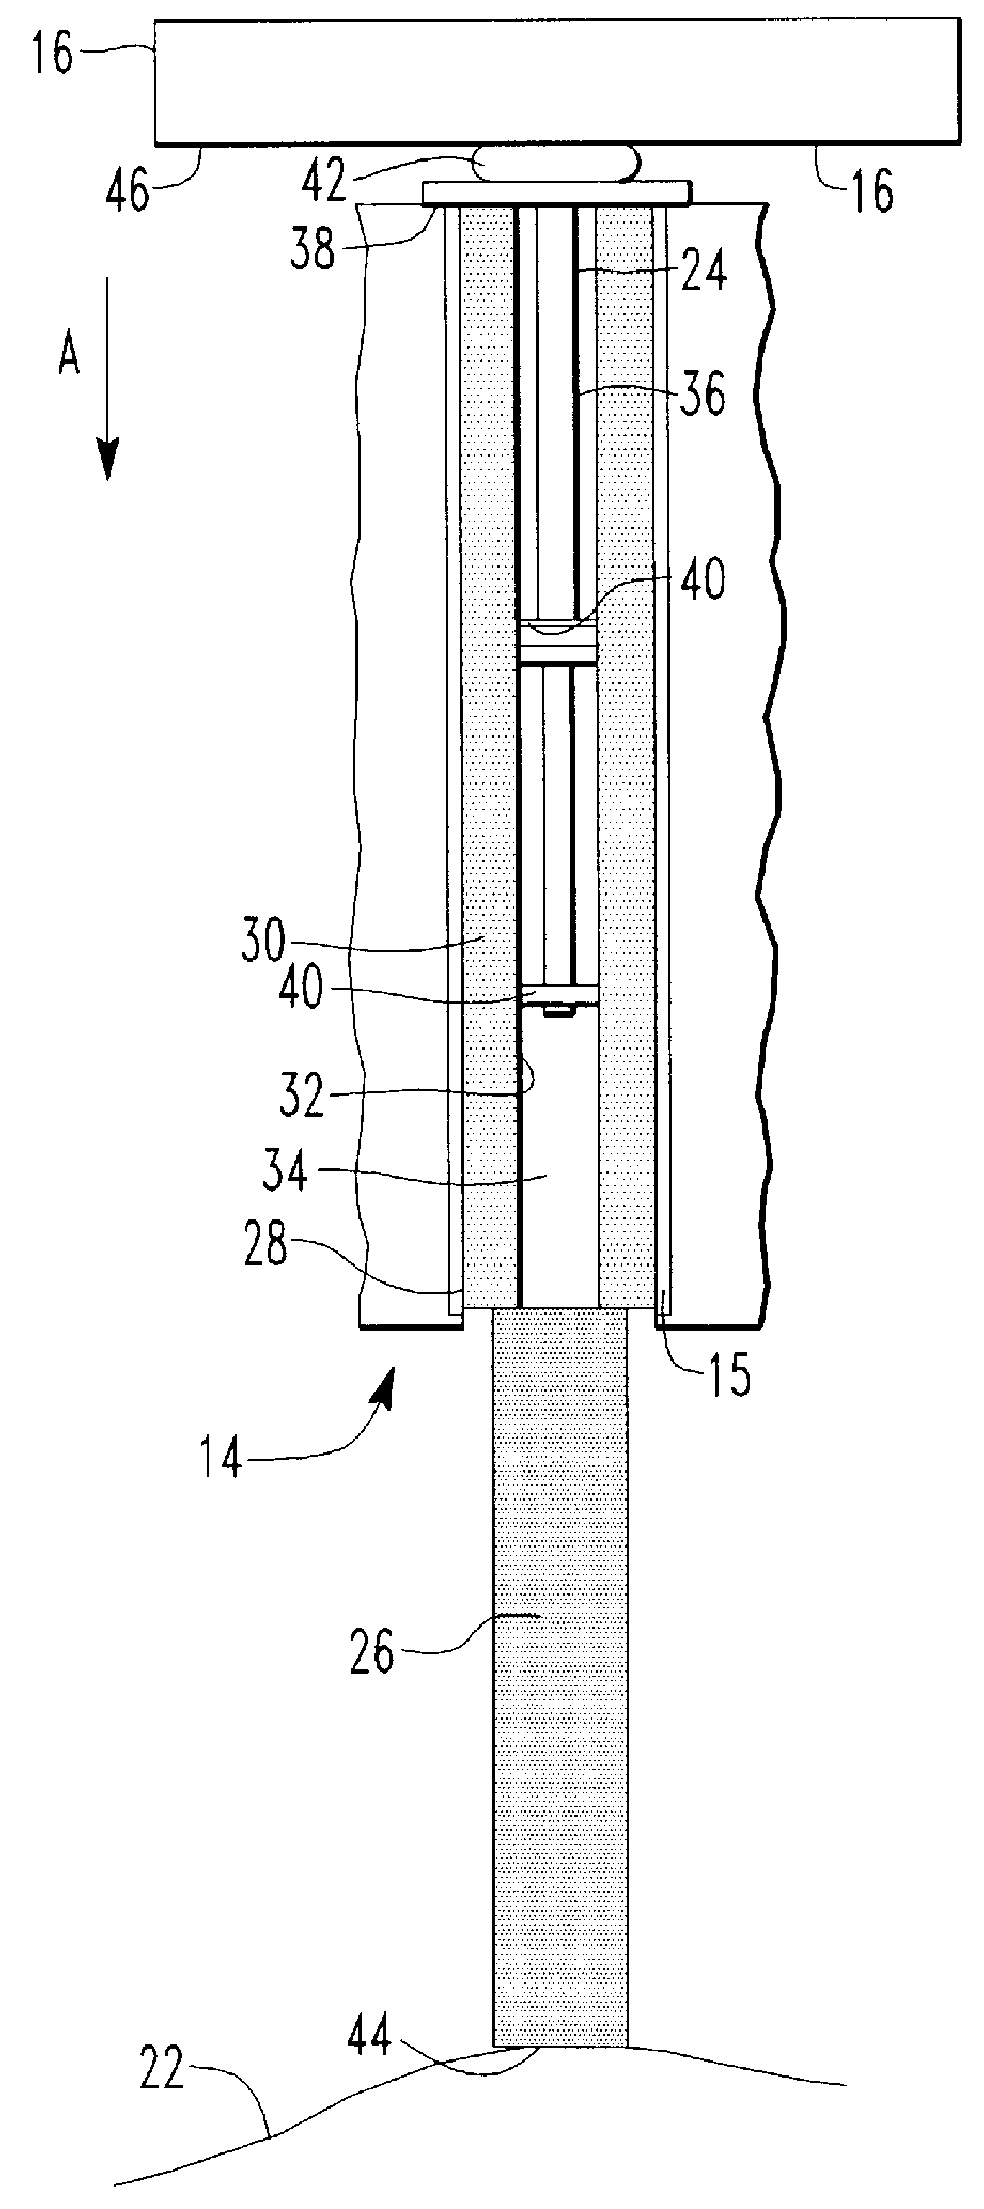 Contour replicating and measuring device